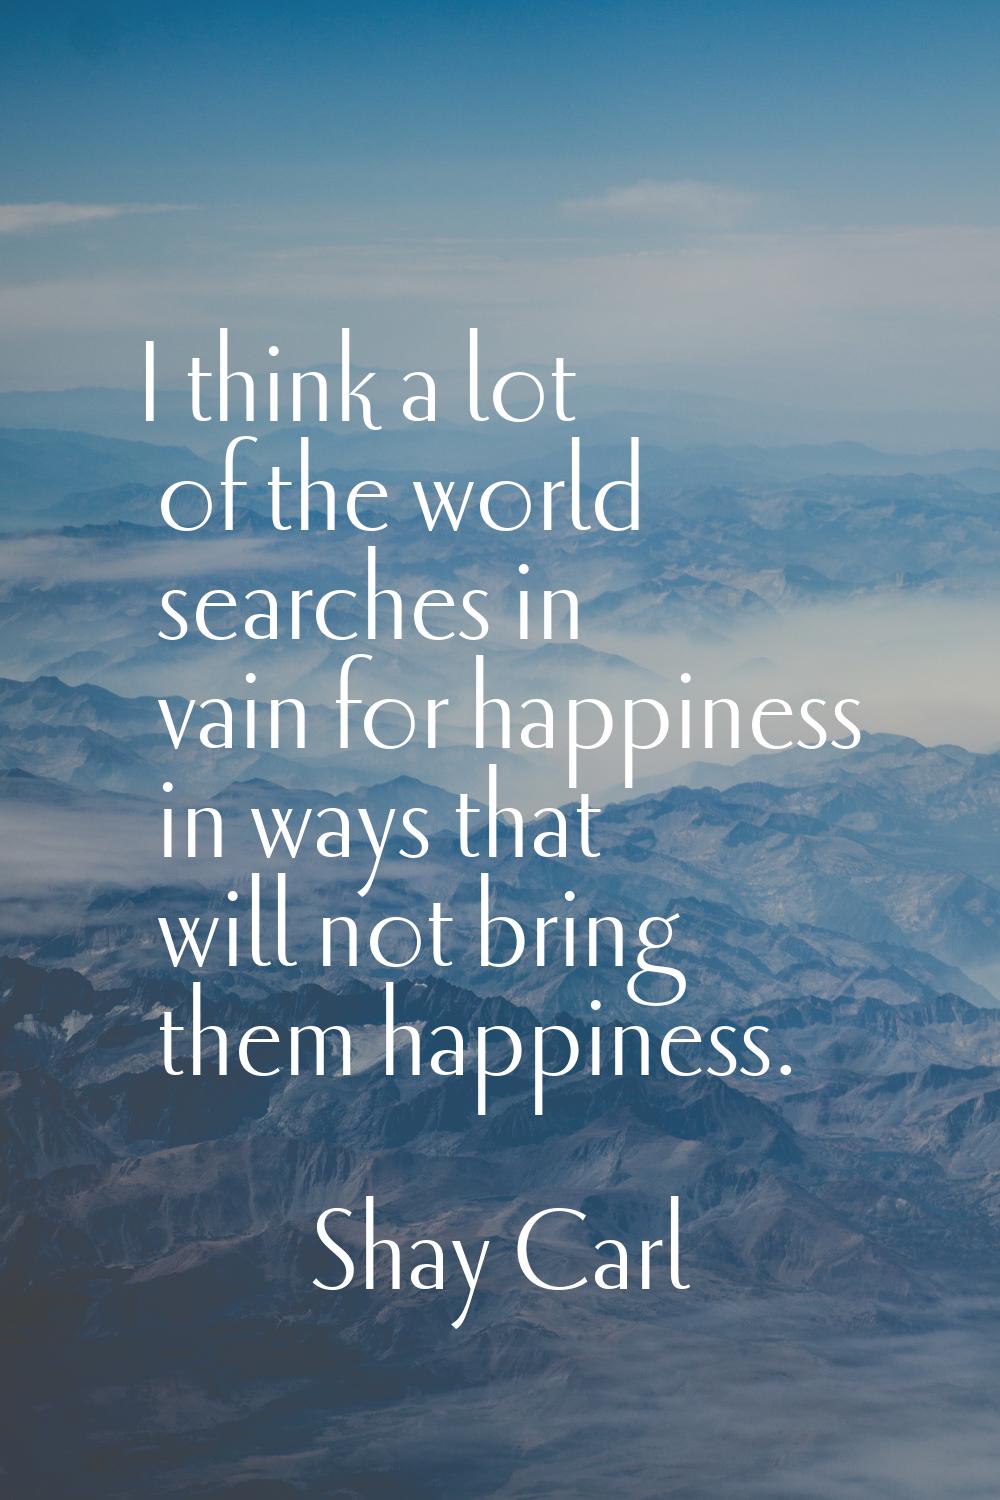 I think a lot of the world searches in vain for happiness in ways that will not bring them happines